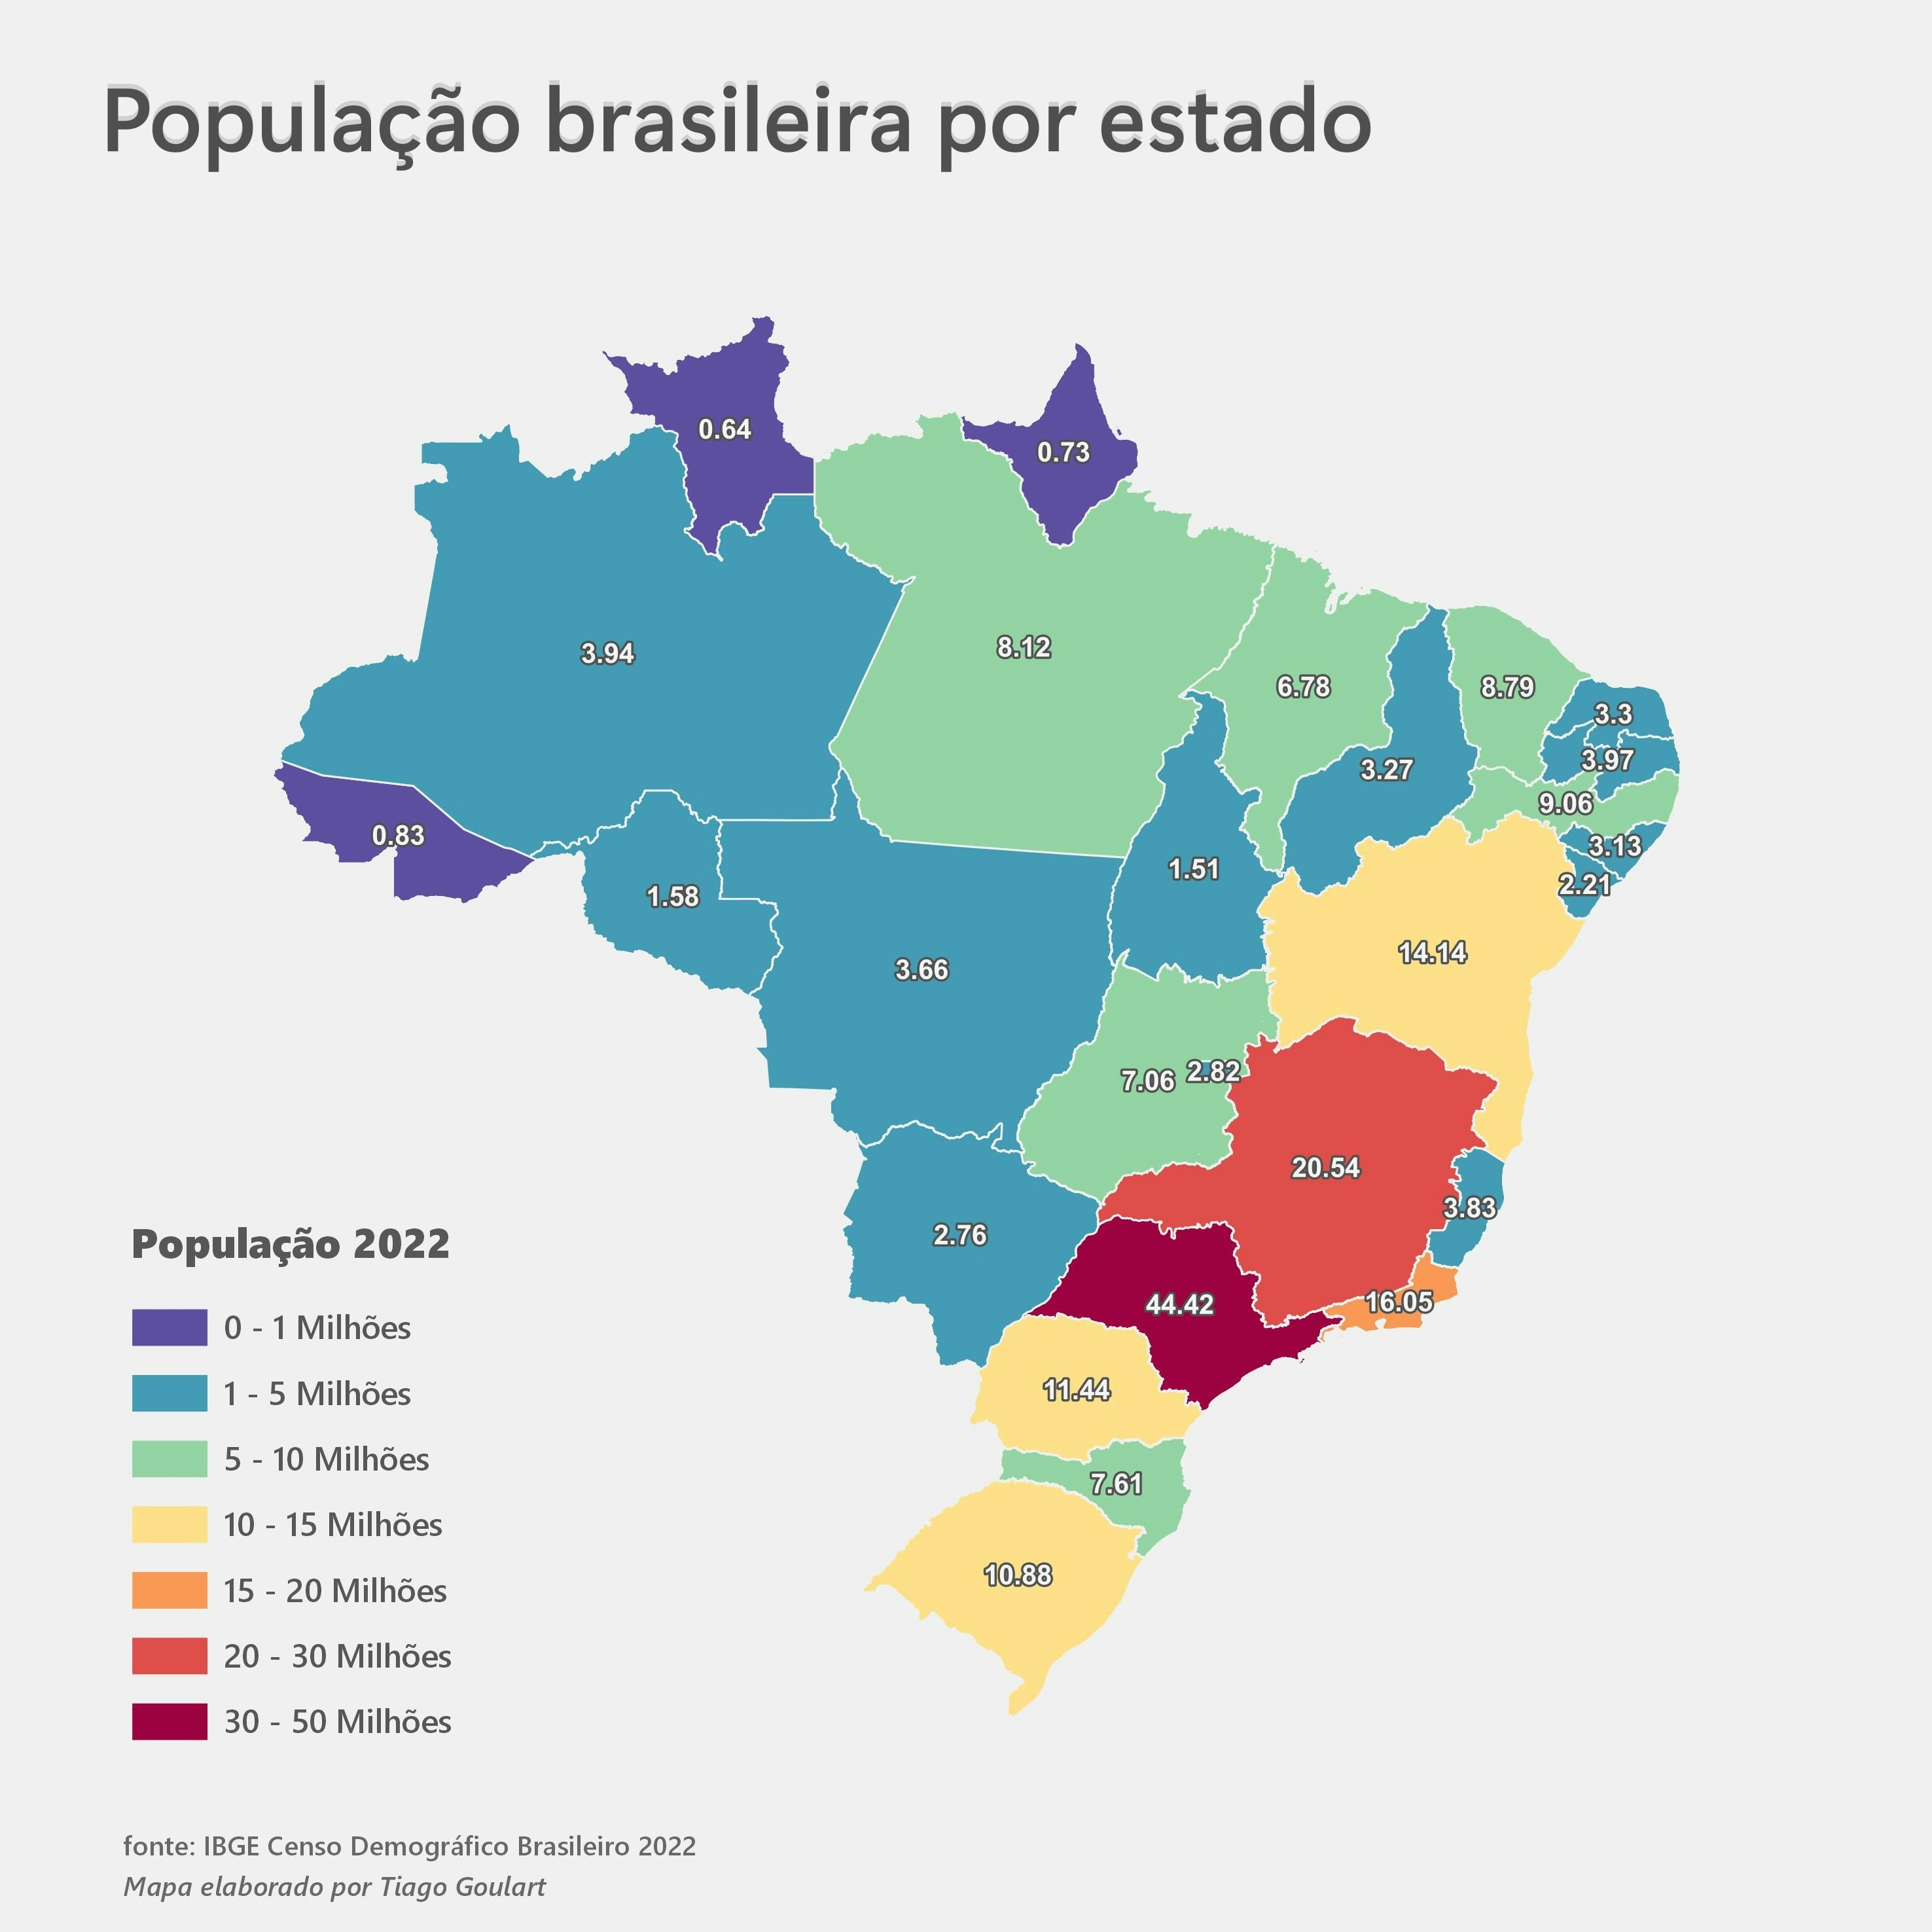 The population of each Brazilian state